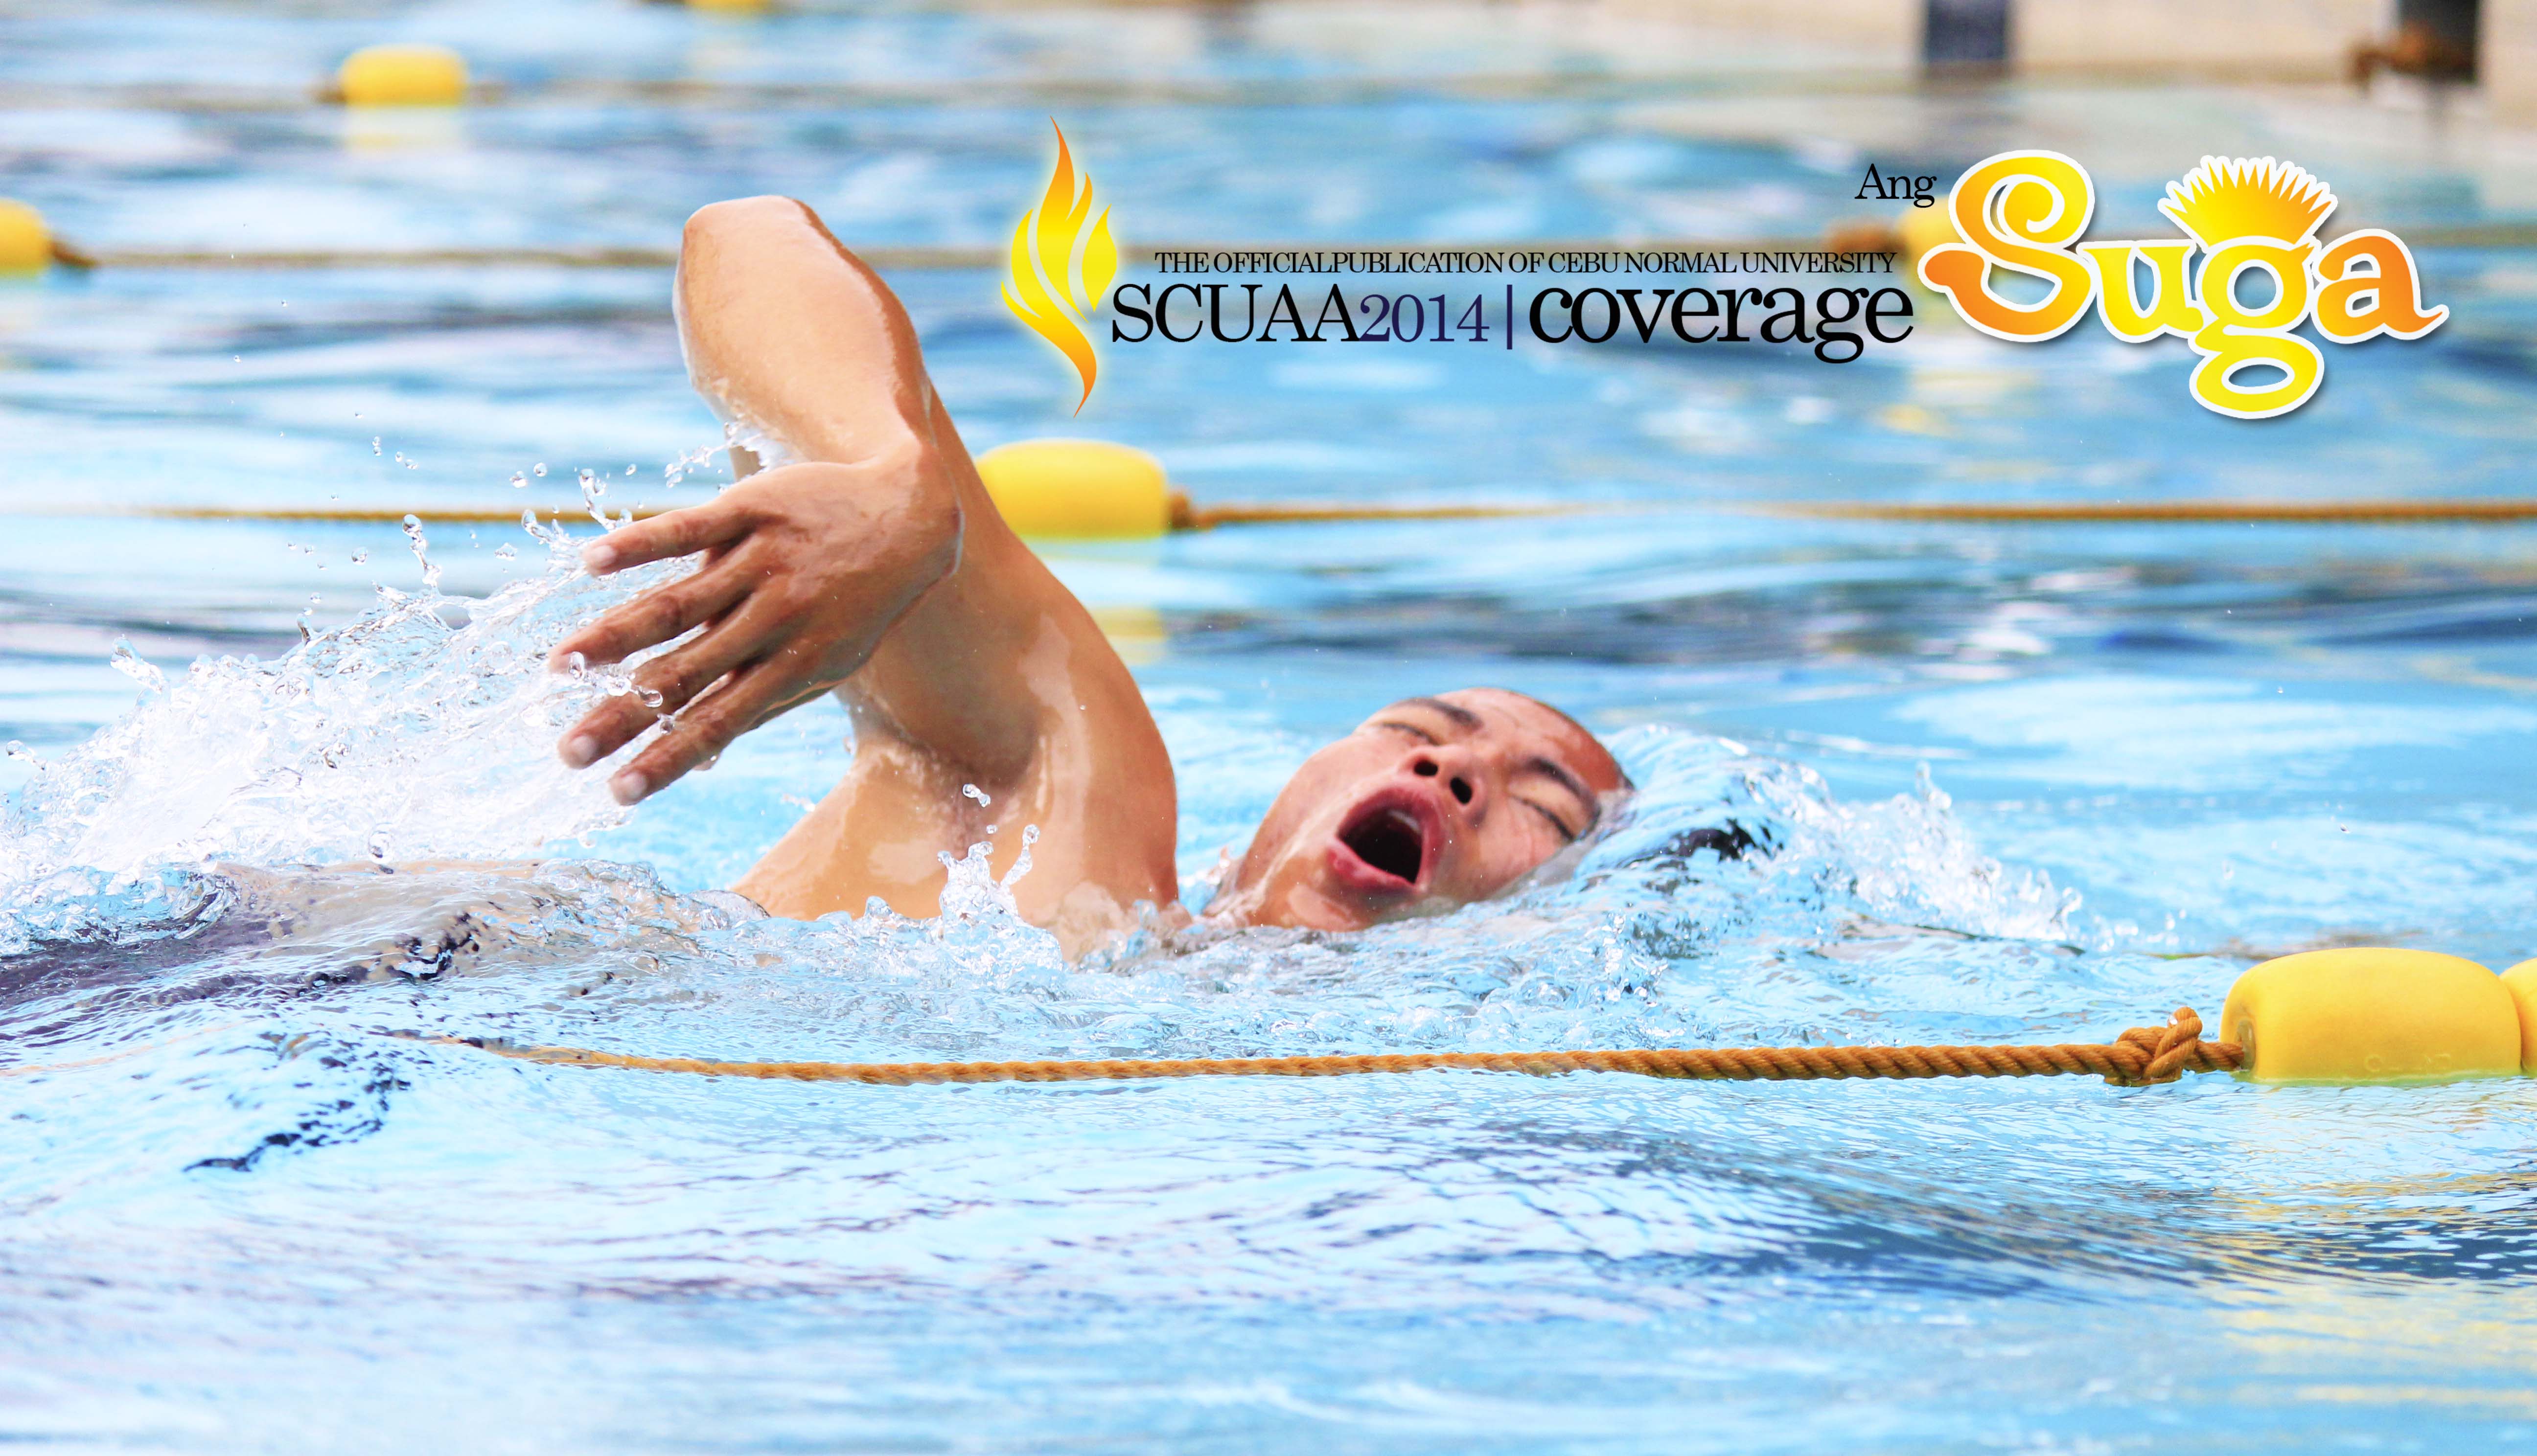 CNU, BISU drown opponents by scores : SWIMMING – Ang Suga Publication